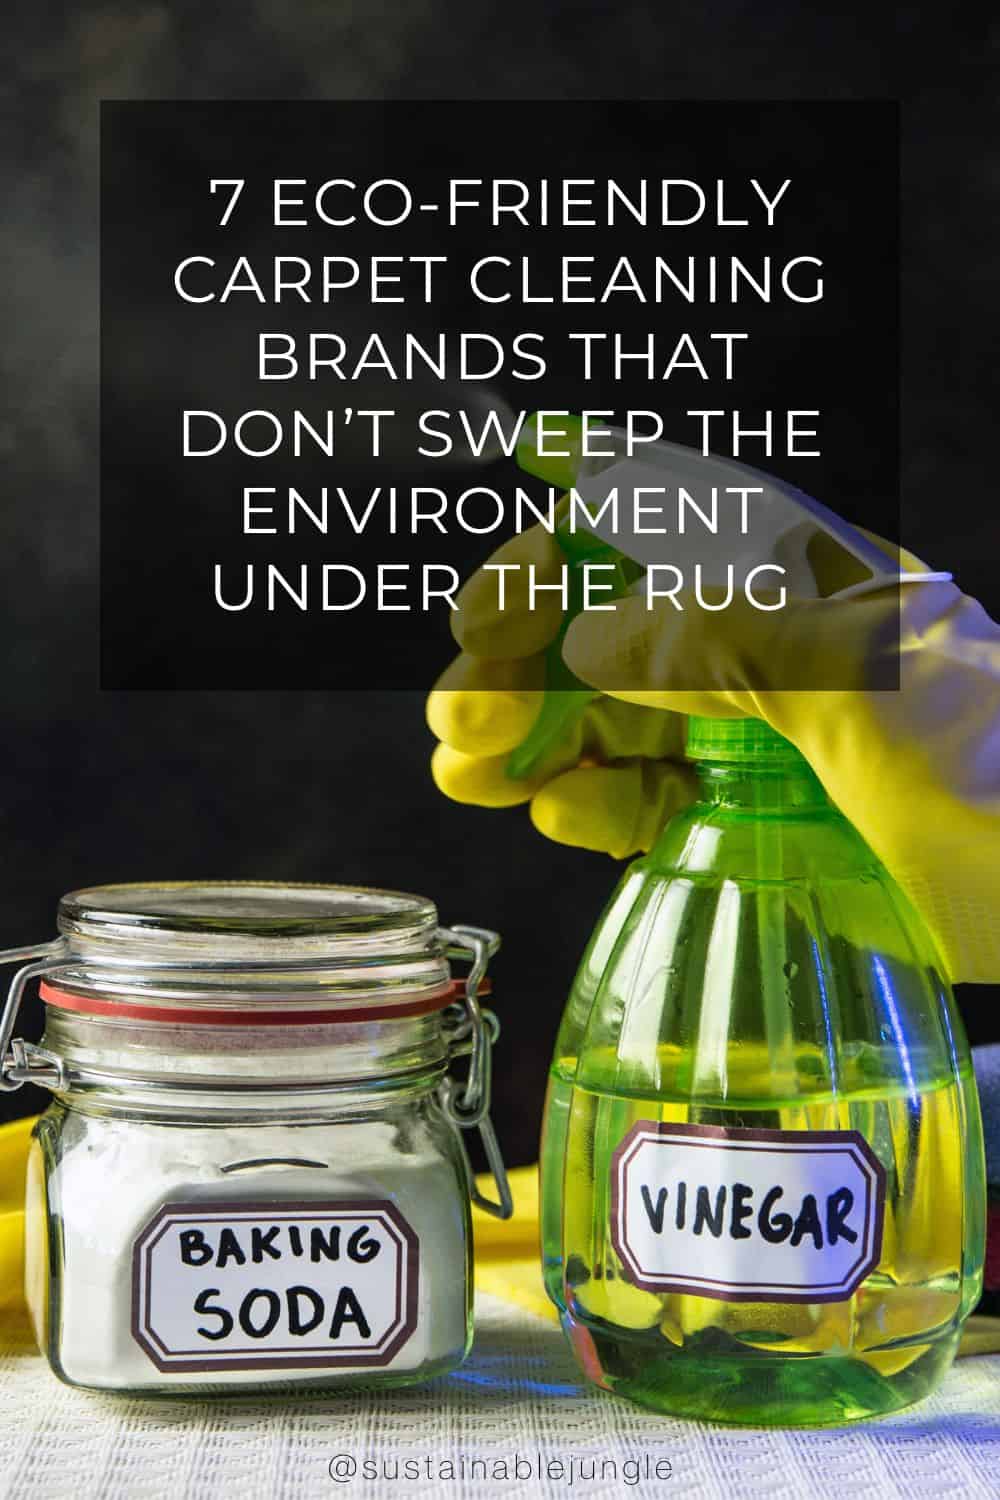 7 Eco-Friendly Carpet Cleaning Brands That Don’t Sweep the Environment Under the Rug Image by fotohelin images #ecofriendlycarpetcleaner #ecofriendlycarpetcleaning #nontoxiccarpetcleaner #bestnontoxiccarpetcleaner #nontodiccarpetcleanerrecipe #sustainablejungle